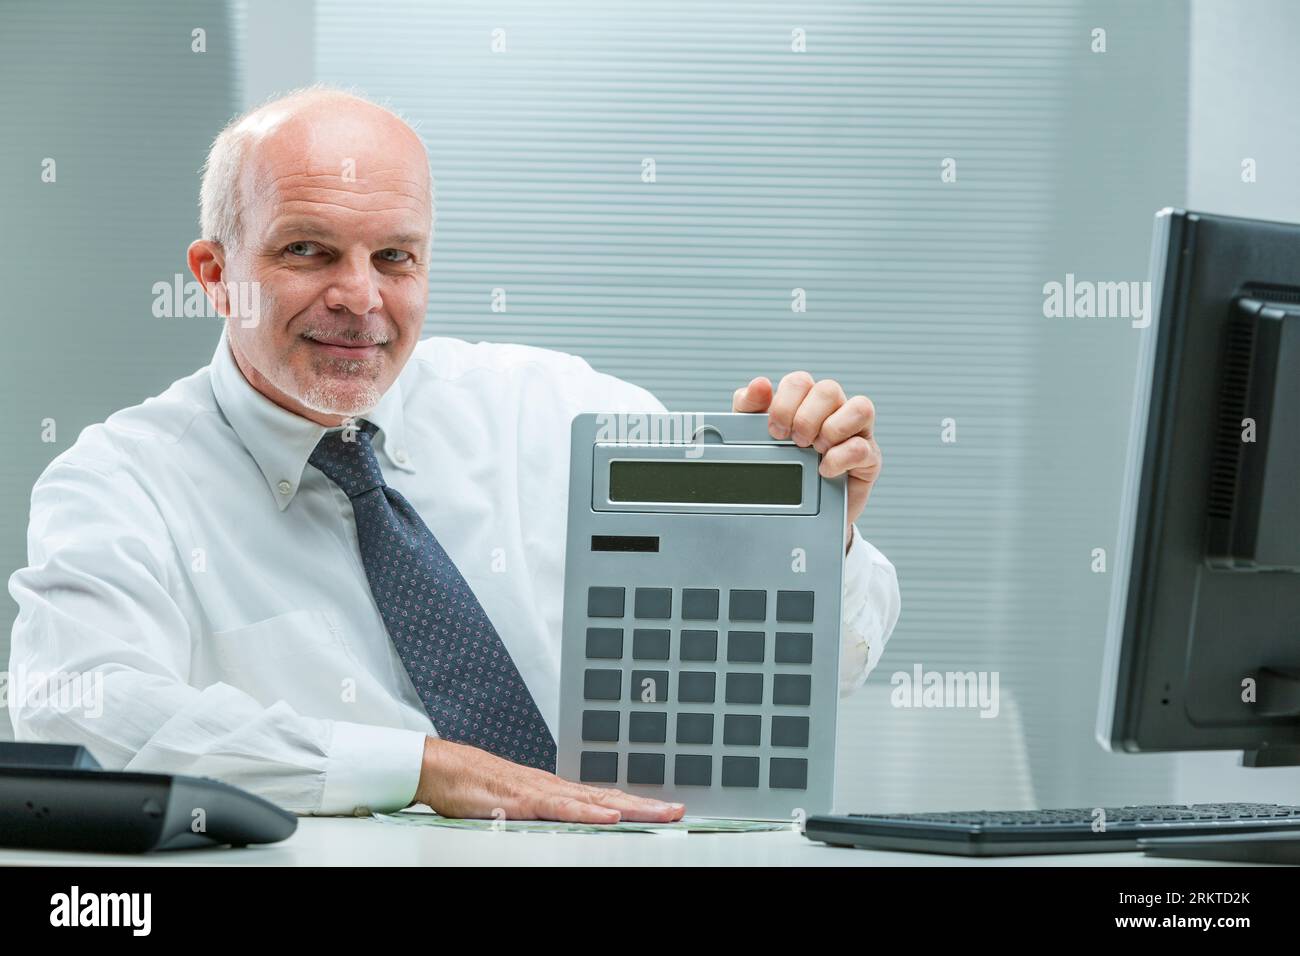 senior businessman in white shirt and tie showcases a cunning glance, clutching a sizable calculator; suggests misleading through manipulated data Stock Photo